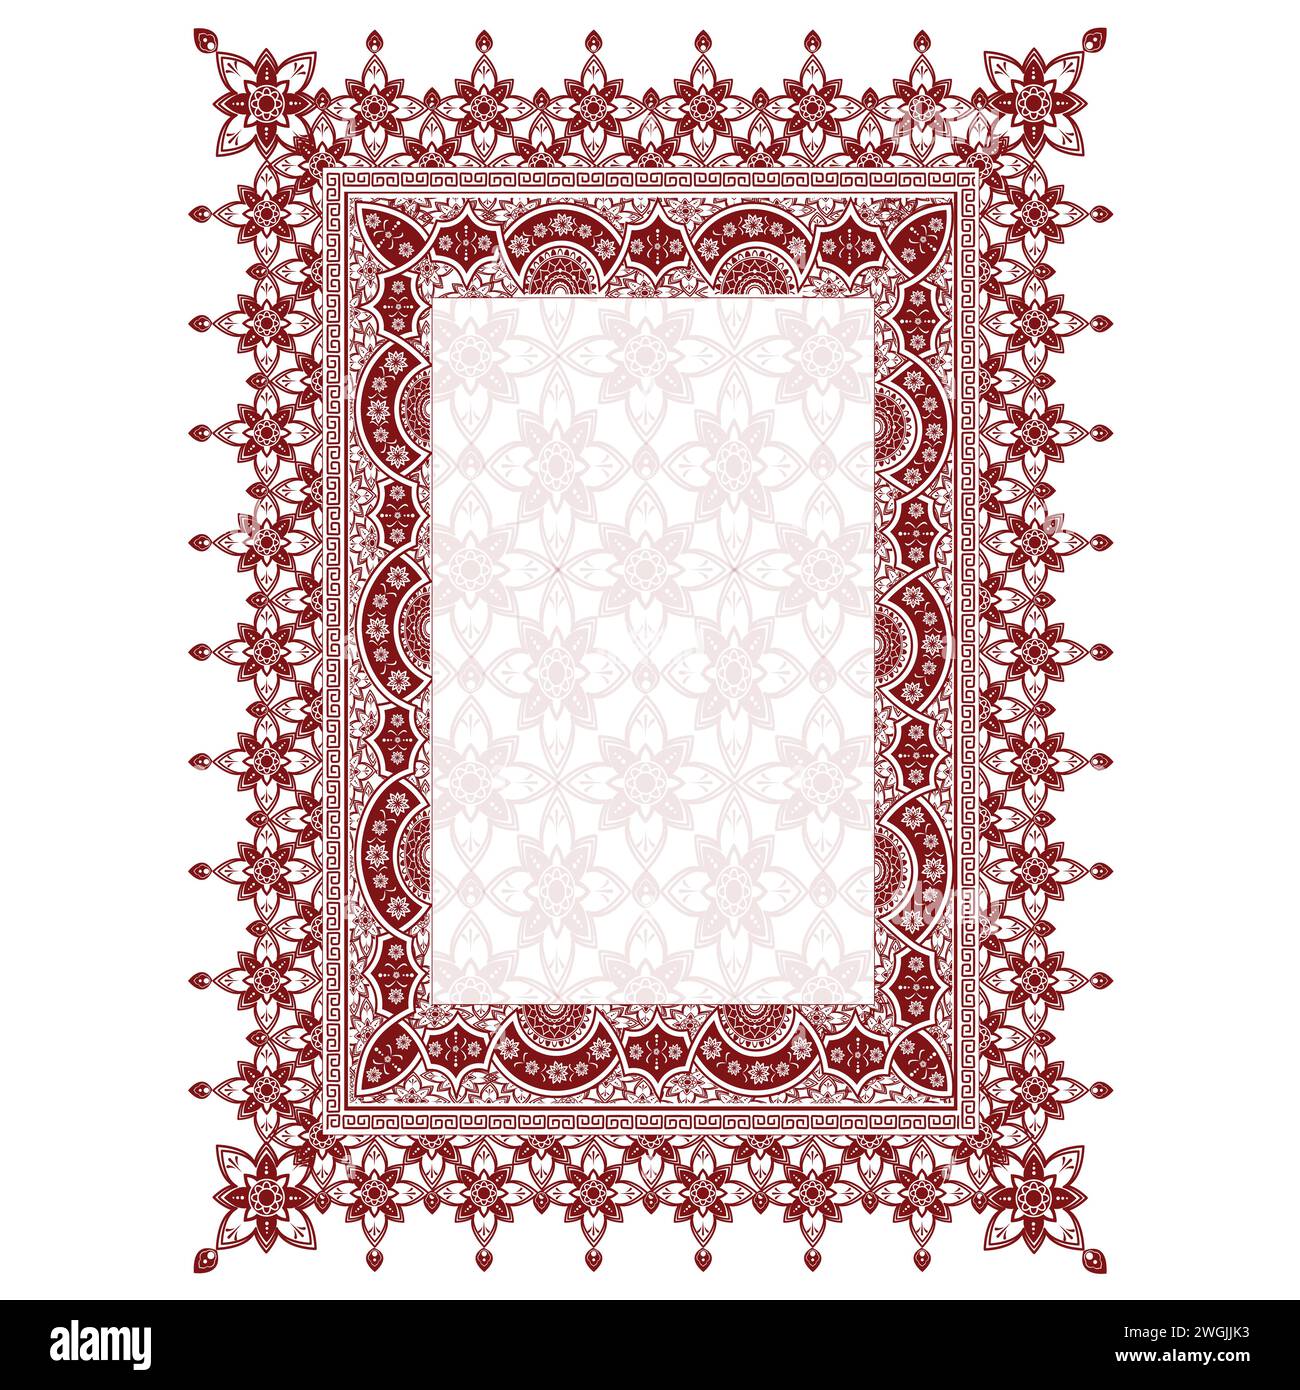 Nikah nama template. Border and frame with modern boho design template.Vector decorative frame. Elegant element for design template, place for text. Stock Vector